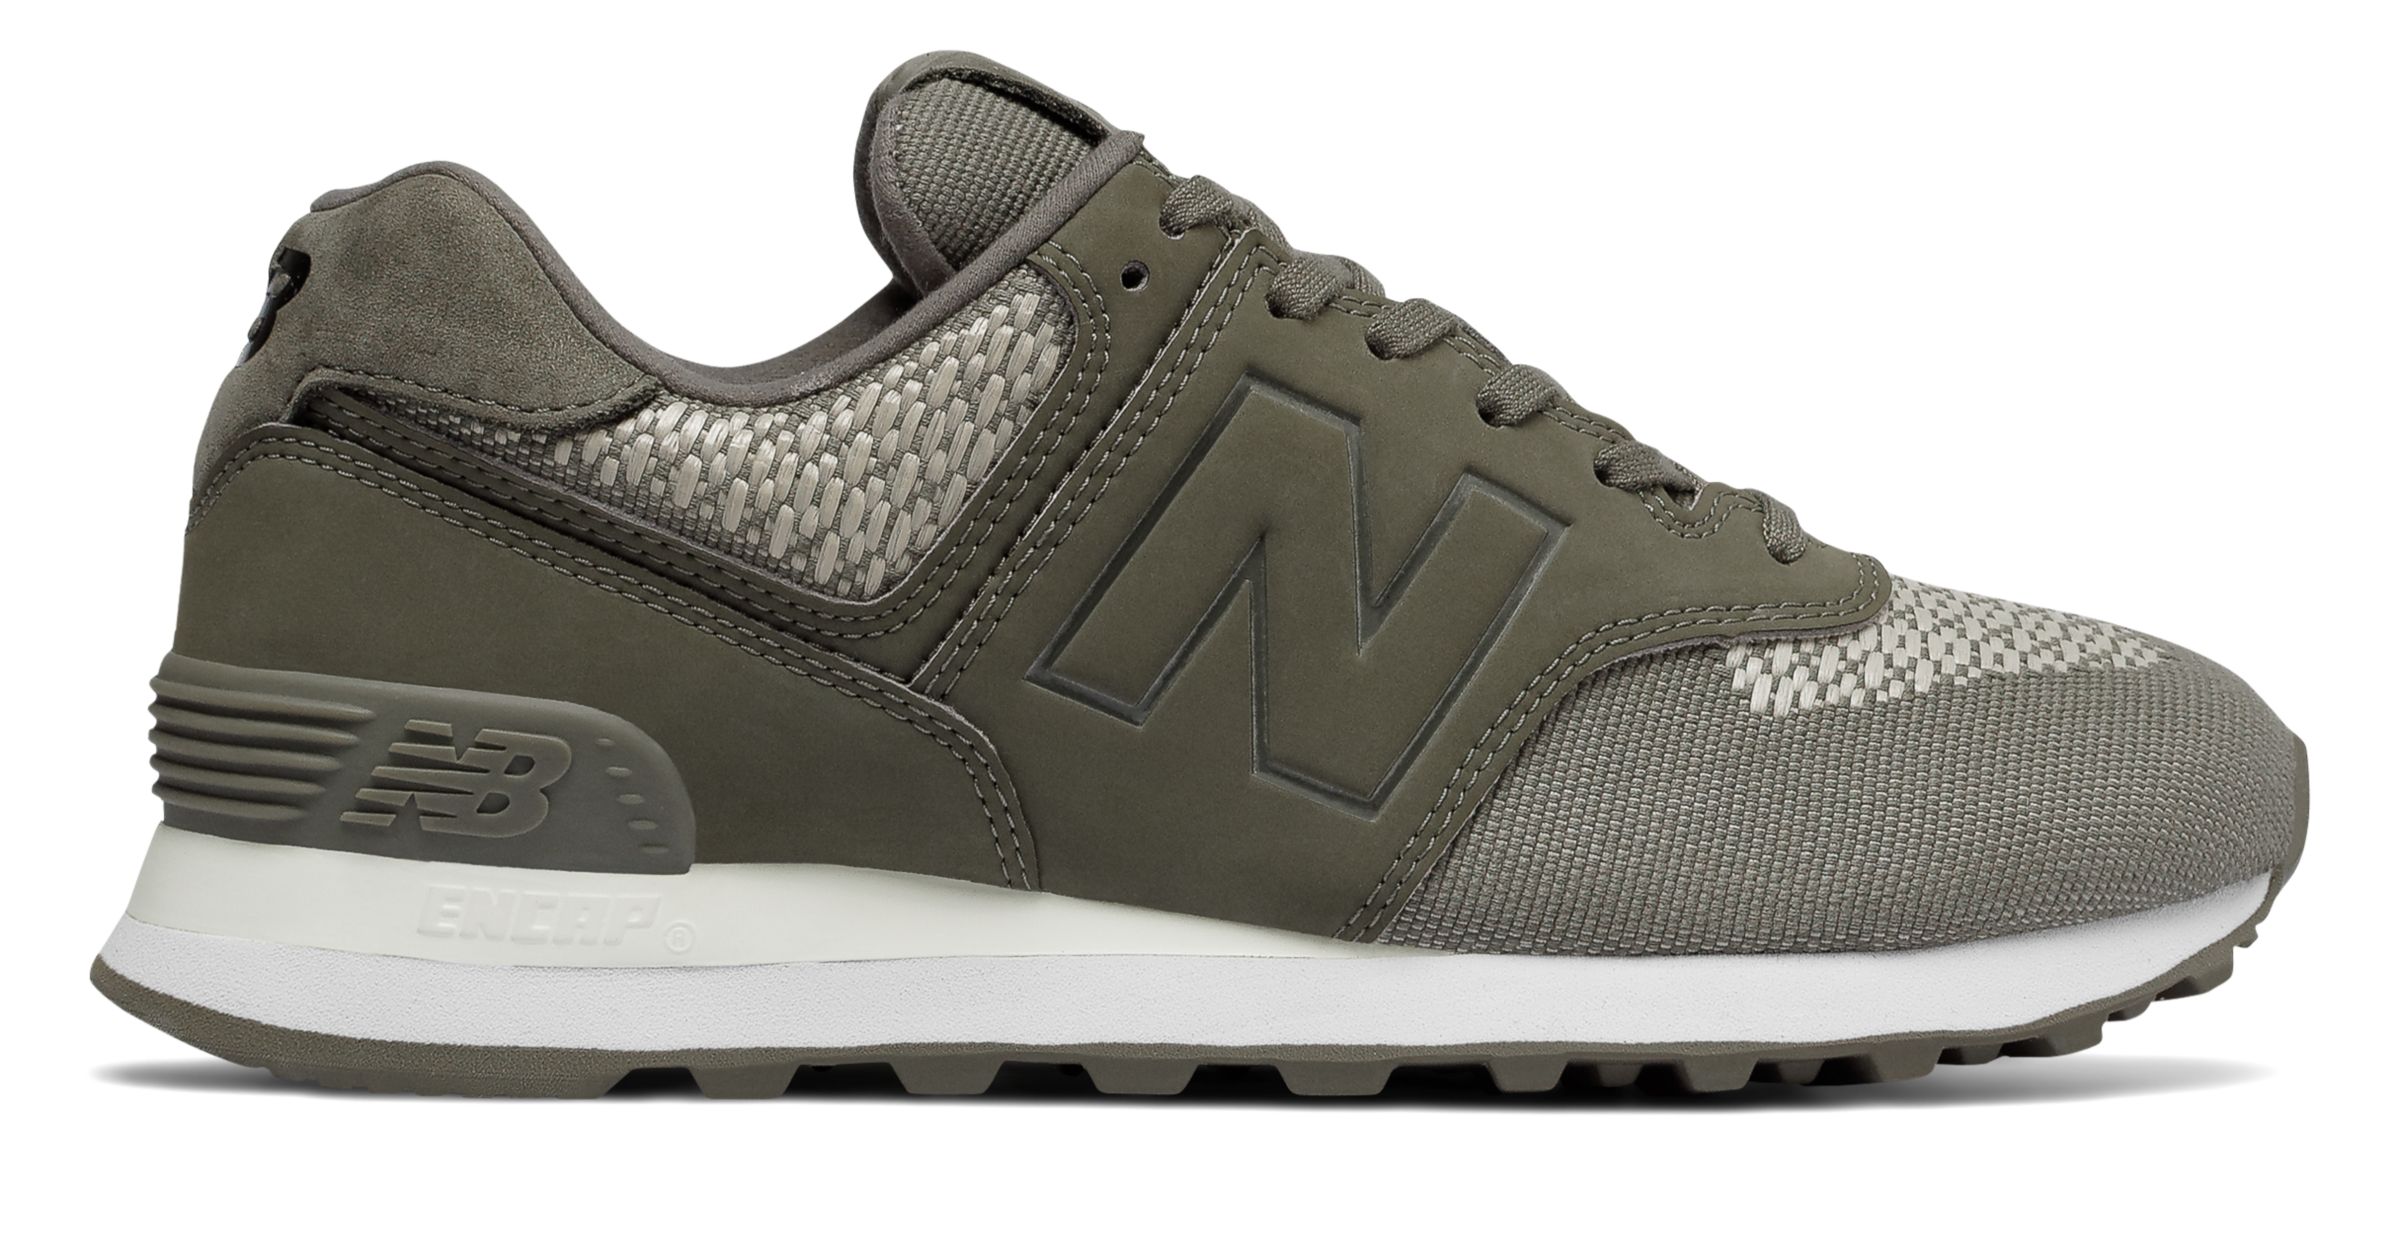 New Balance WL574-TR on Sale - Discounts Up to 20% Off on WL574FAC at Joe's  New Balance Outlet